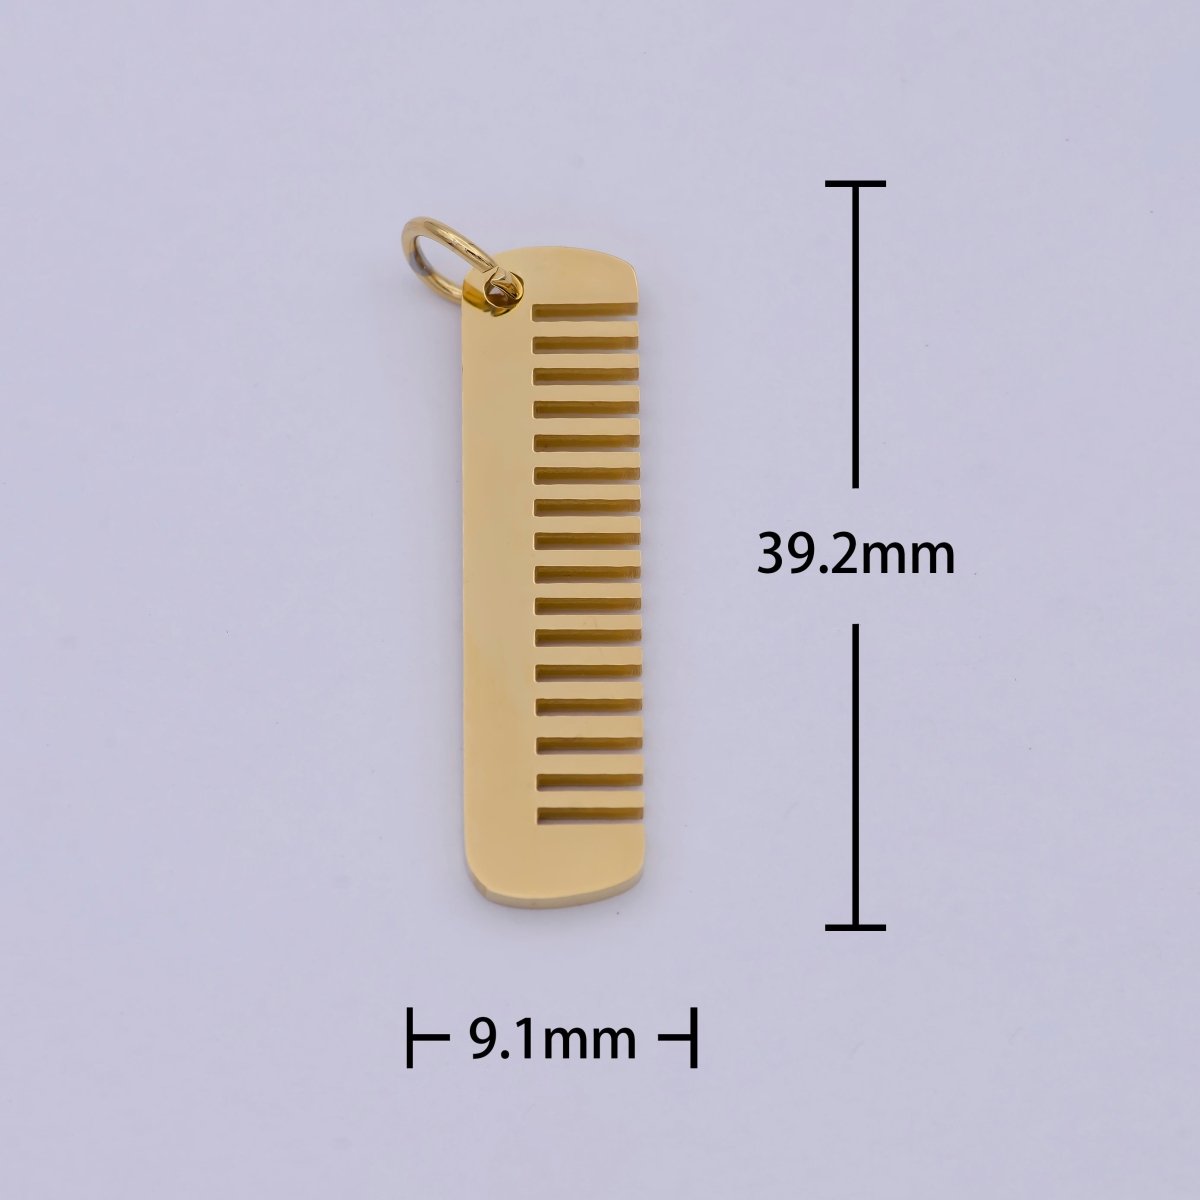 24K Gold Filled Stainless Steel Comb Charms, Golden Haircomb Hairstylist Salon Stylist Bracelet Earring Necklace for Jewelry Making E-692 - DLUXCA